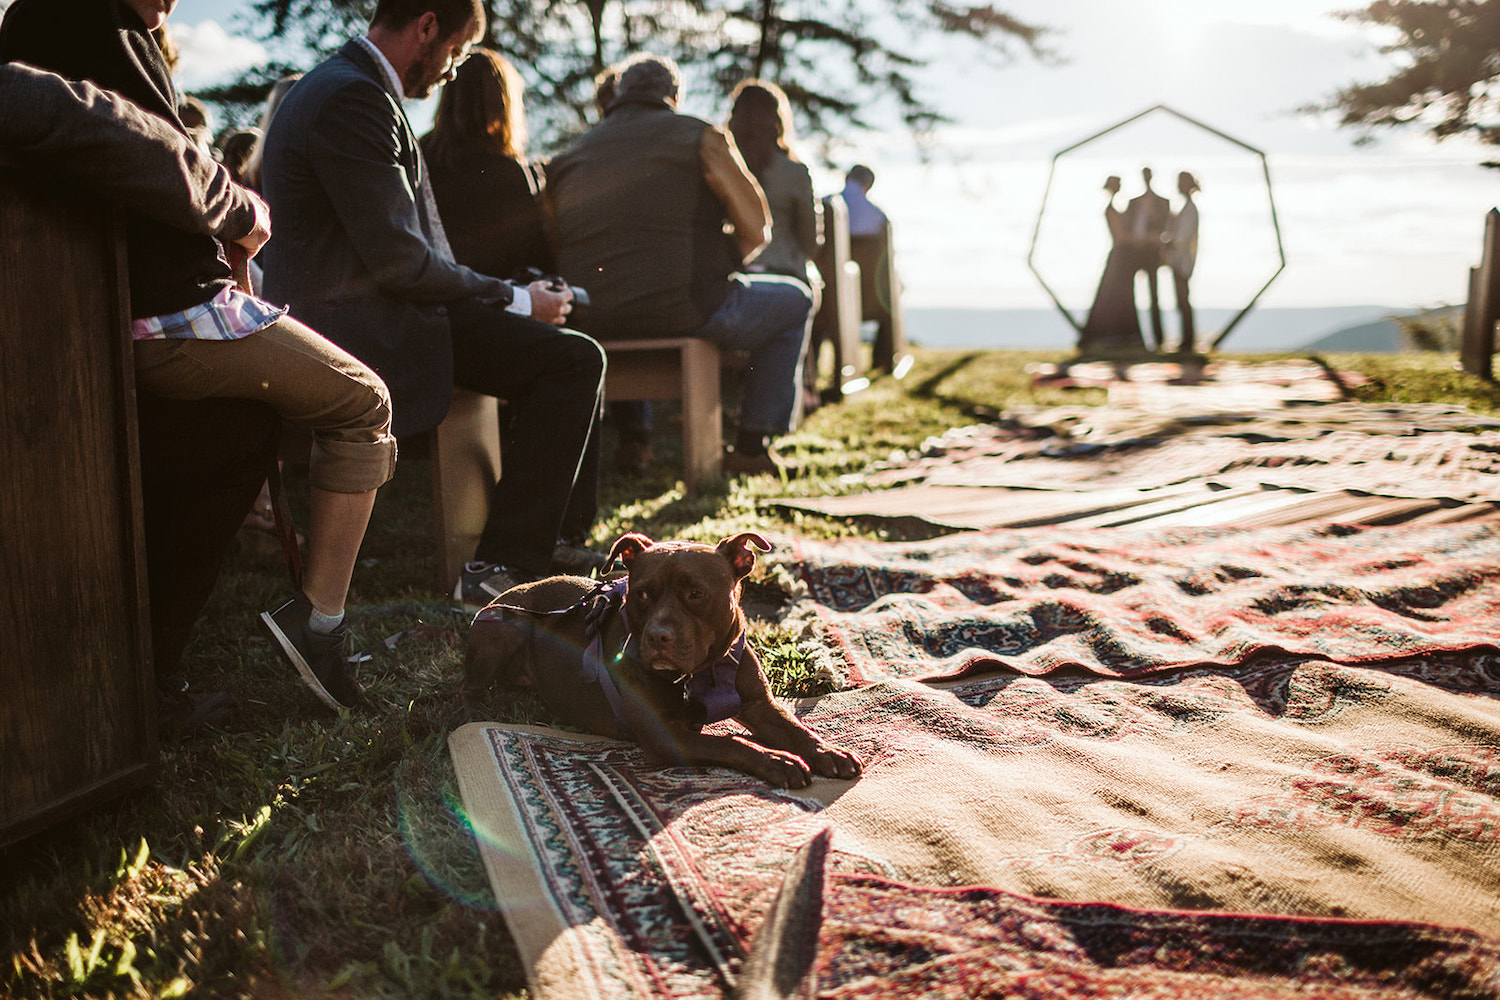 dog lies on Oriental rug in the aisle of Hemlock Falls wedding ceremony while man and woman exchange vows